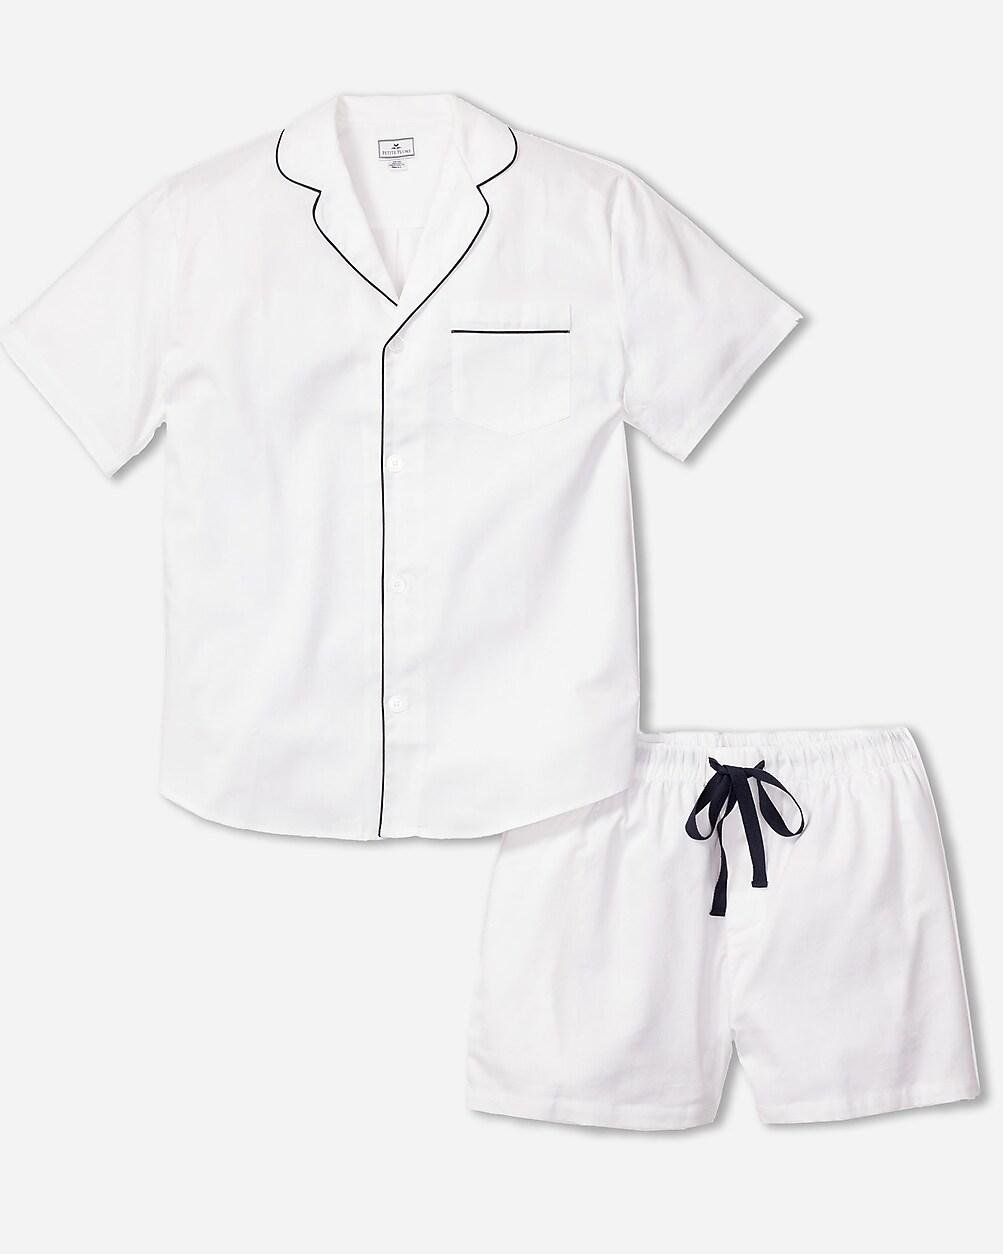 Petite Plume™ men's short set with piping by J.CREW